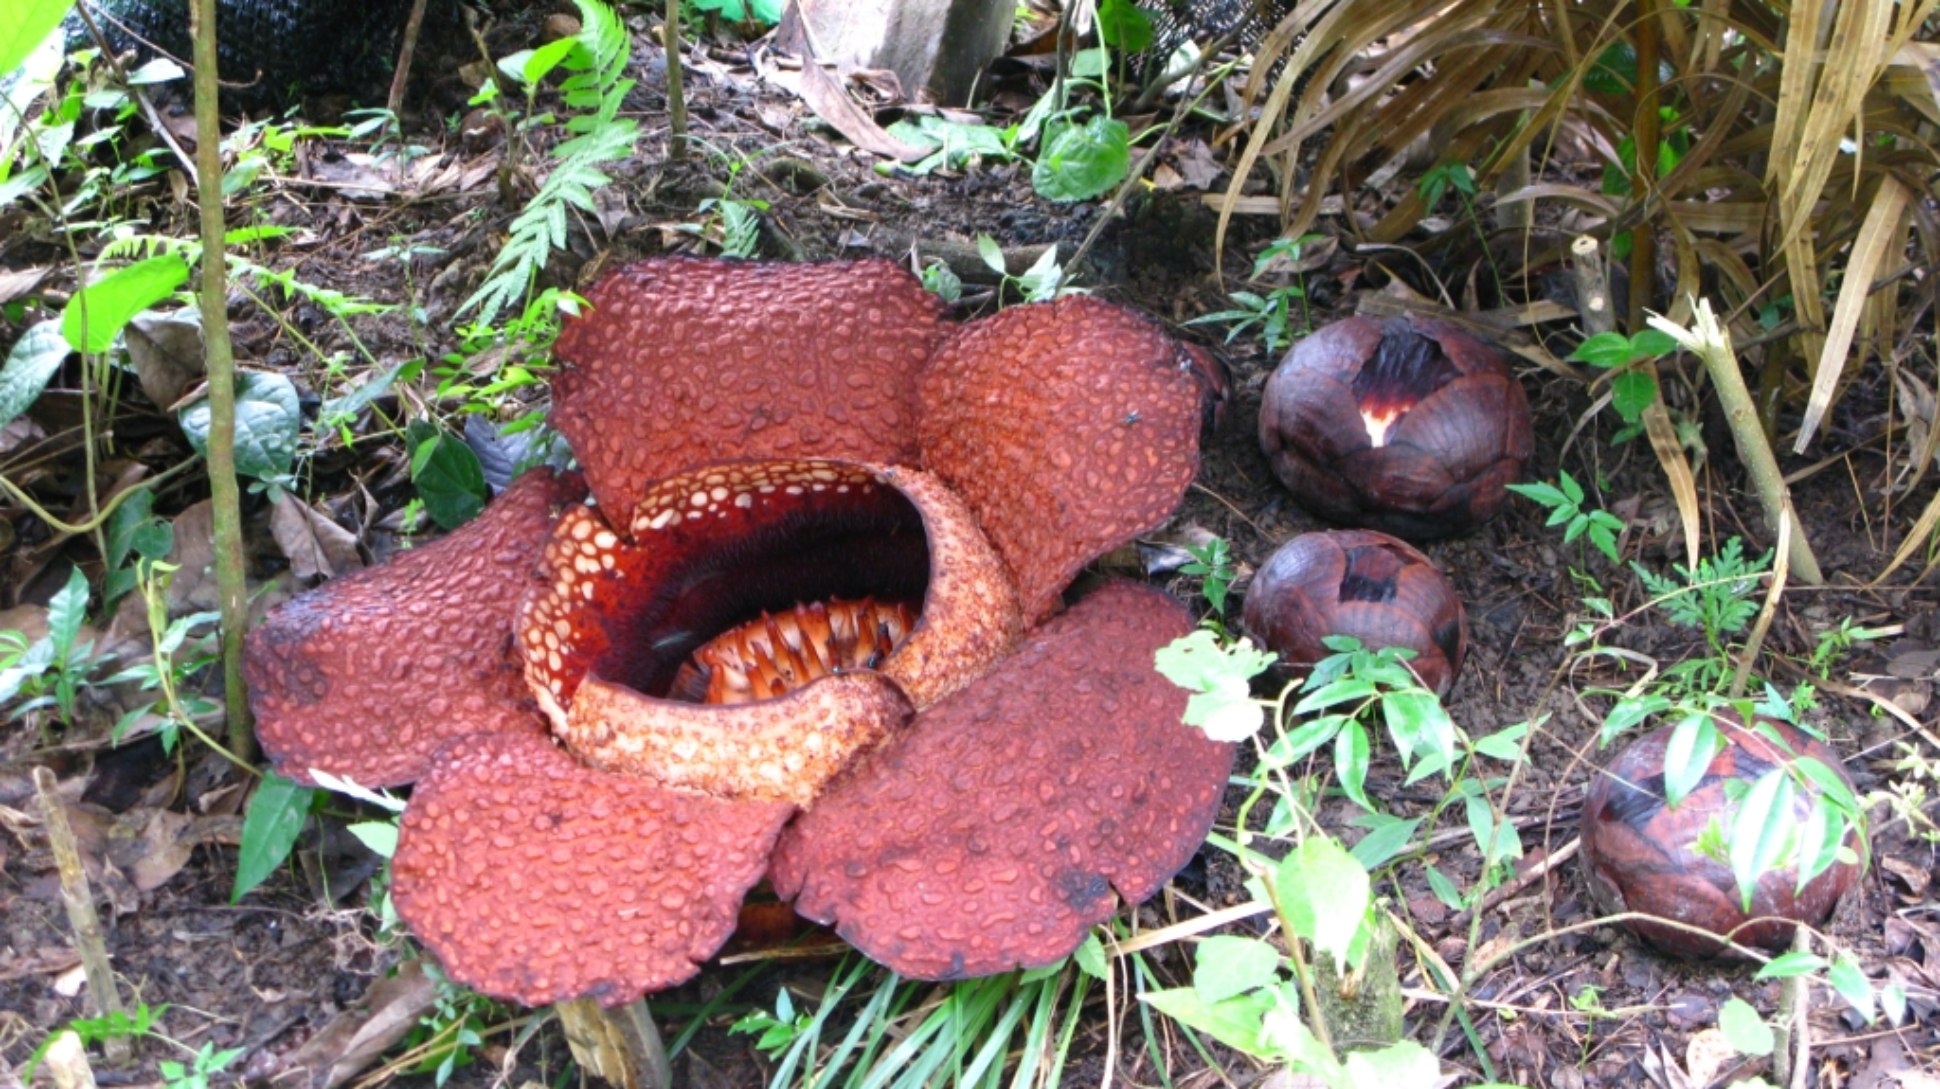 A large red flower on a rainforest floor alongside maroon coloured buds